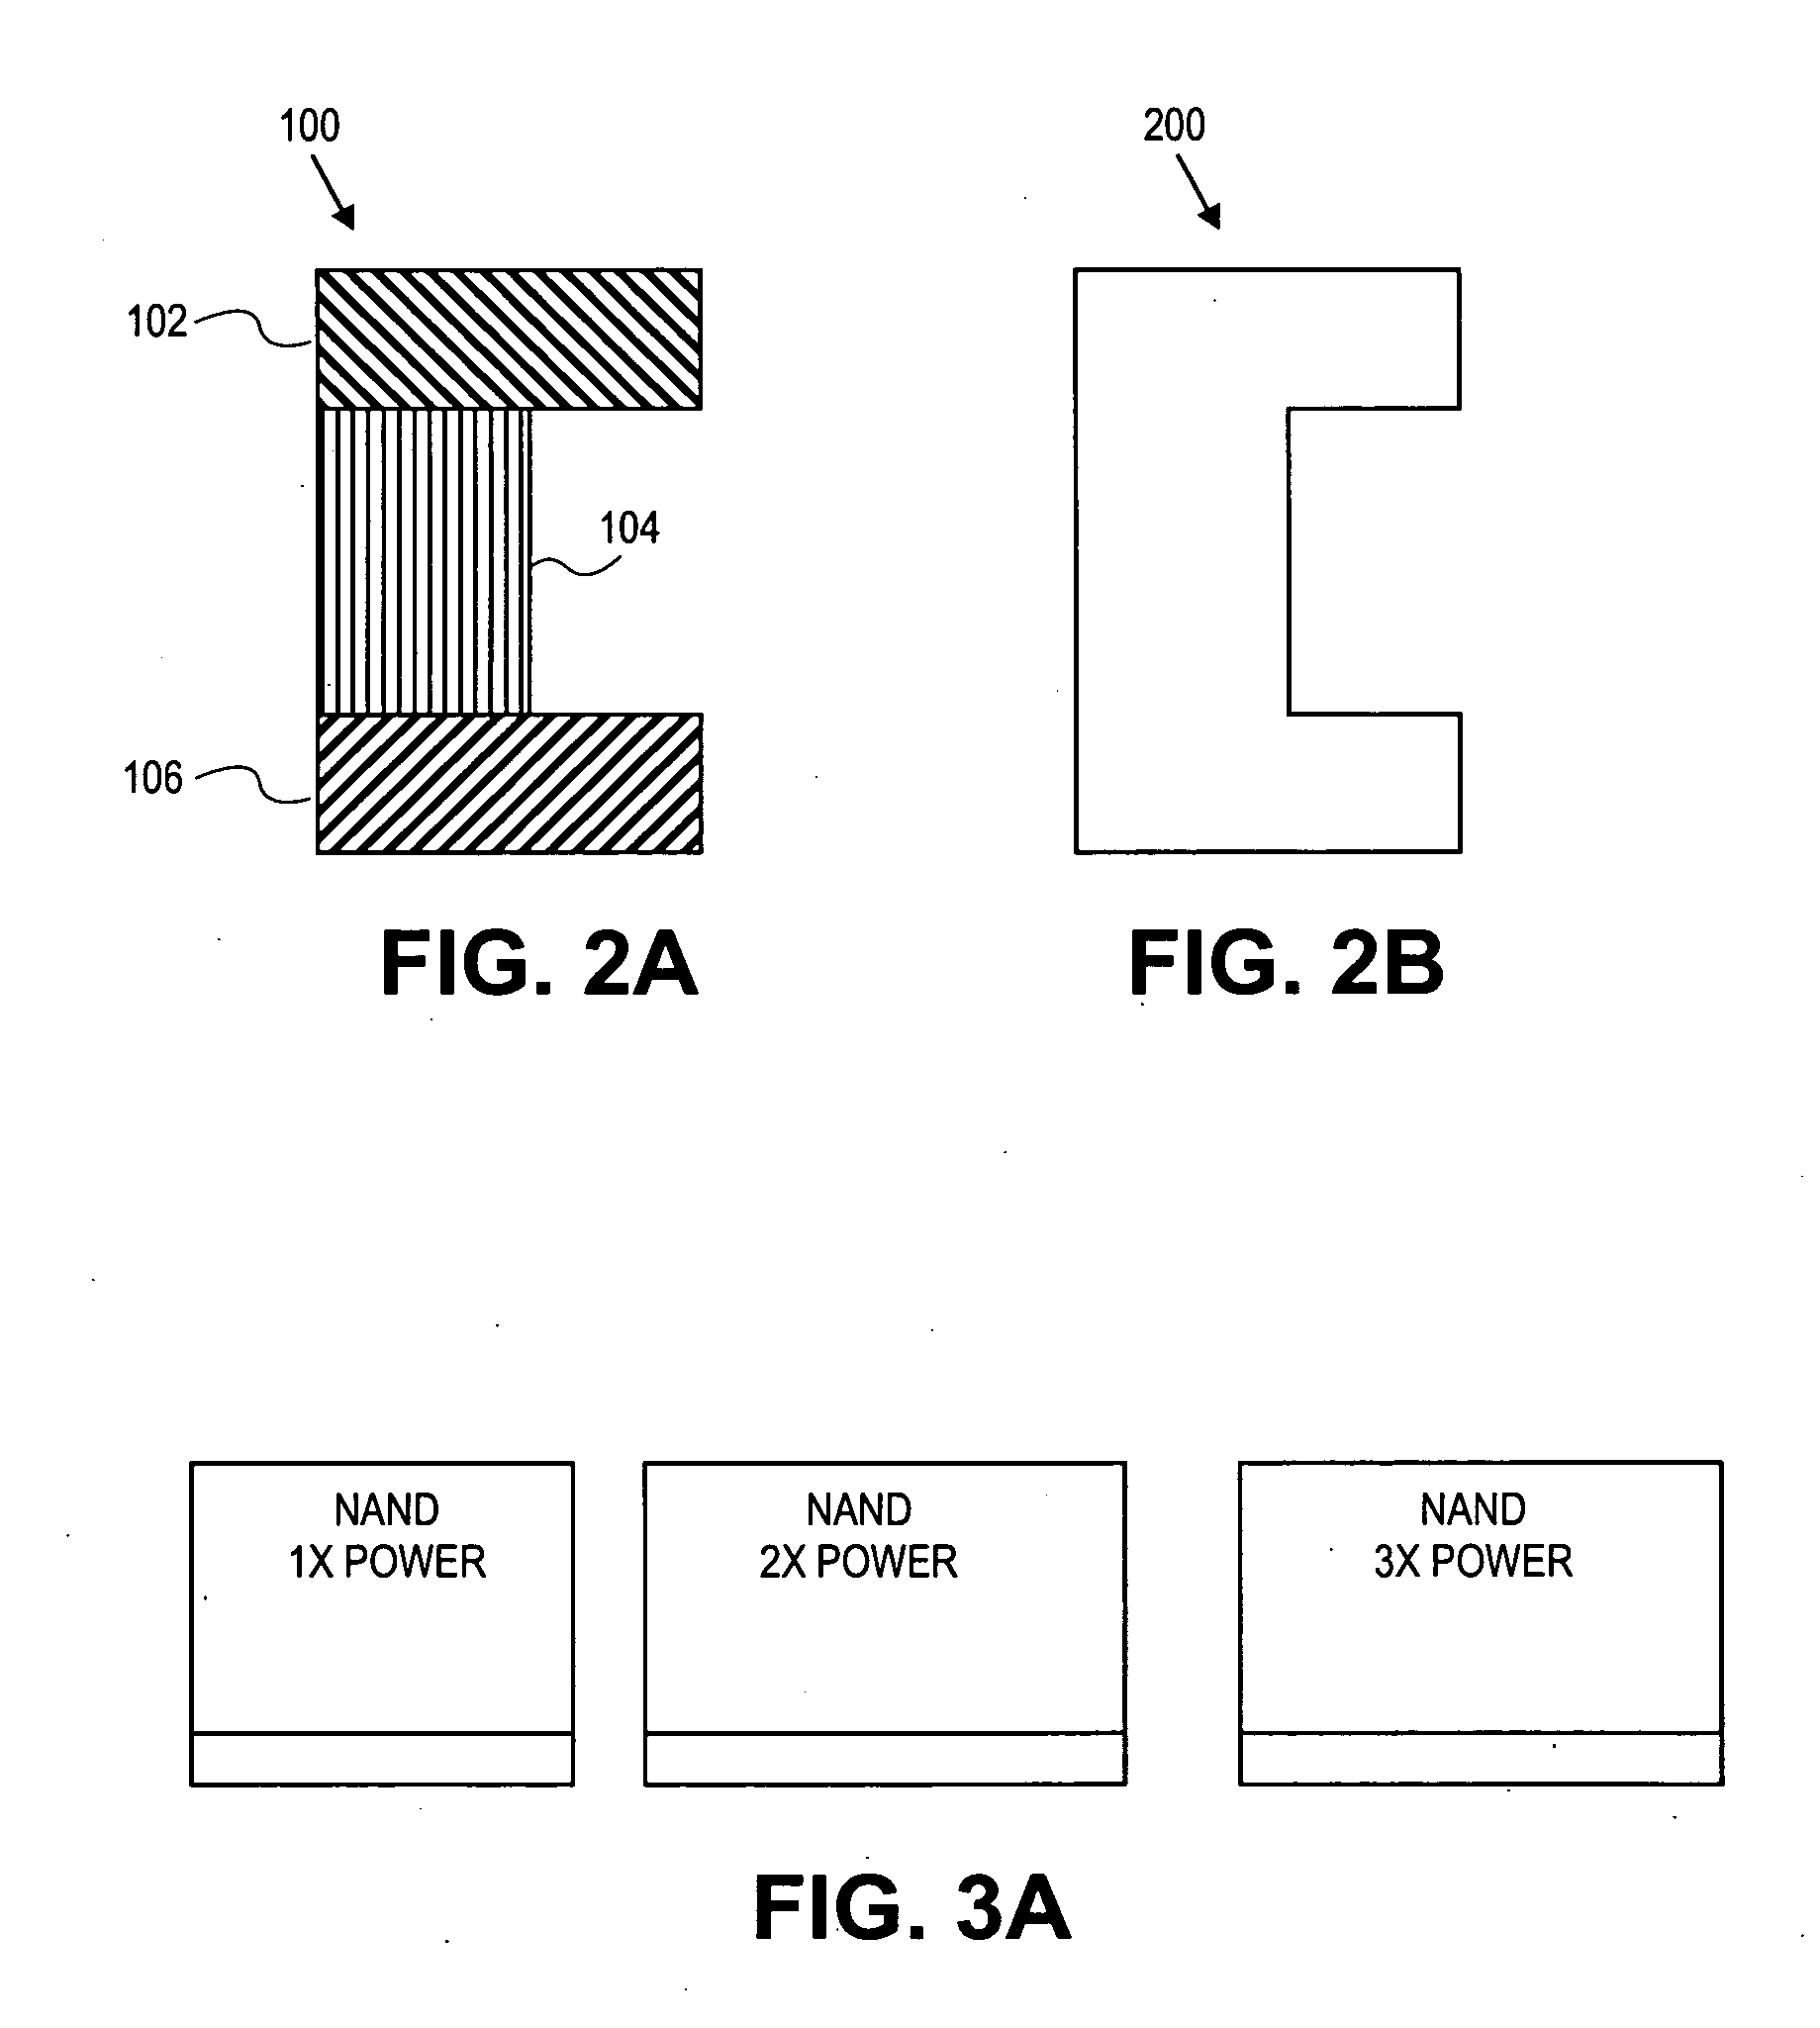 Method and system for improving particle beam lithography